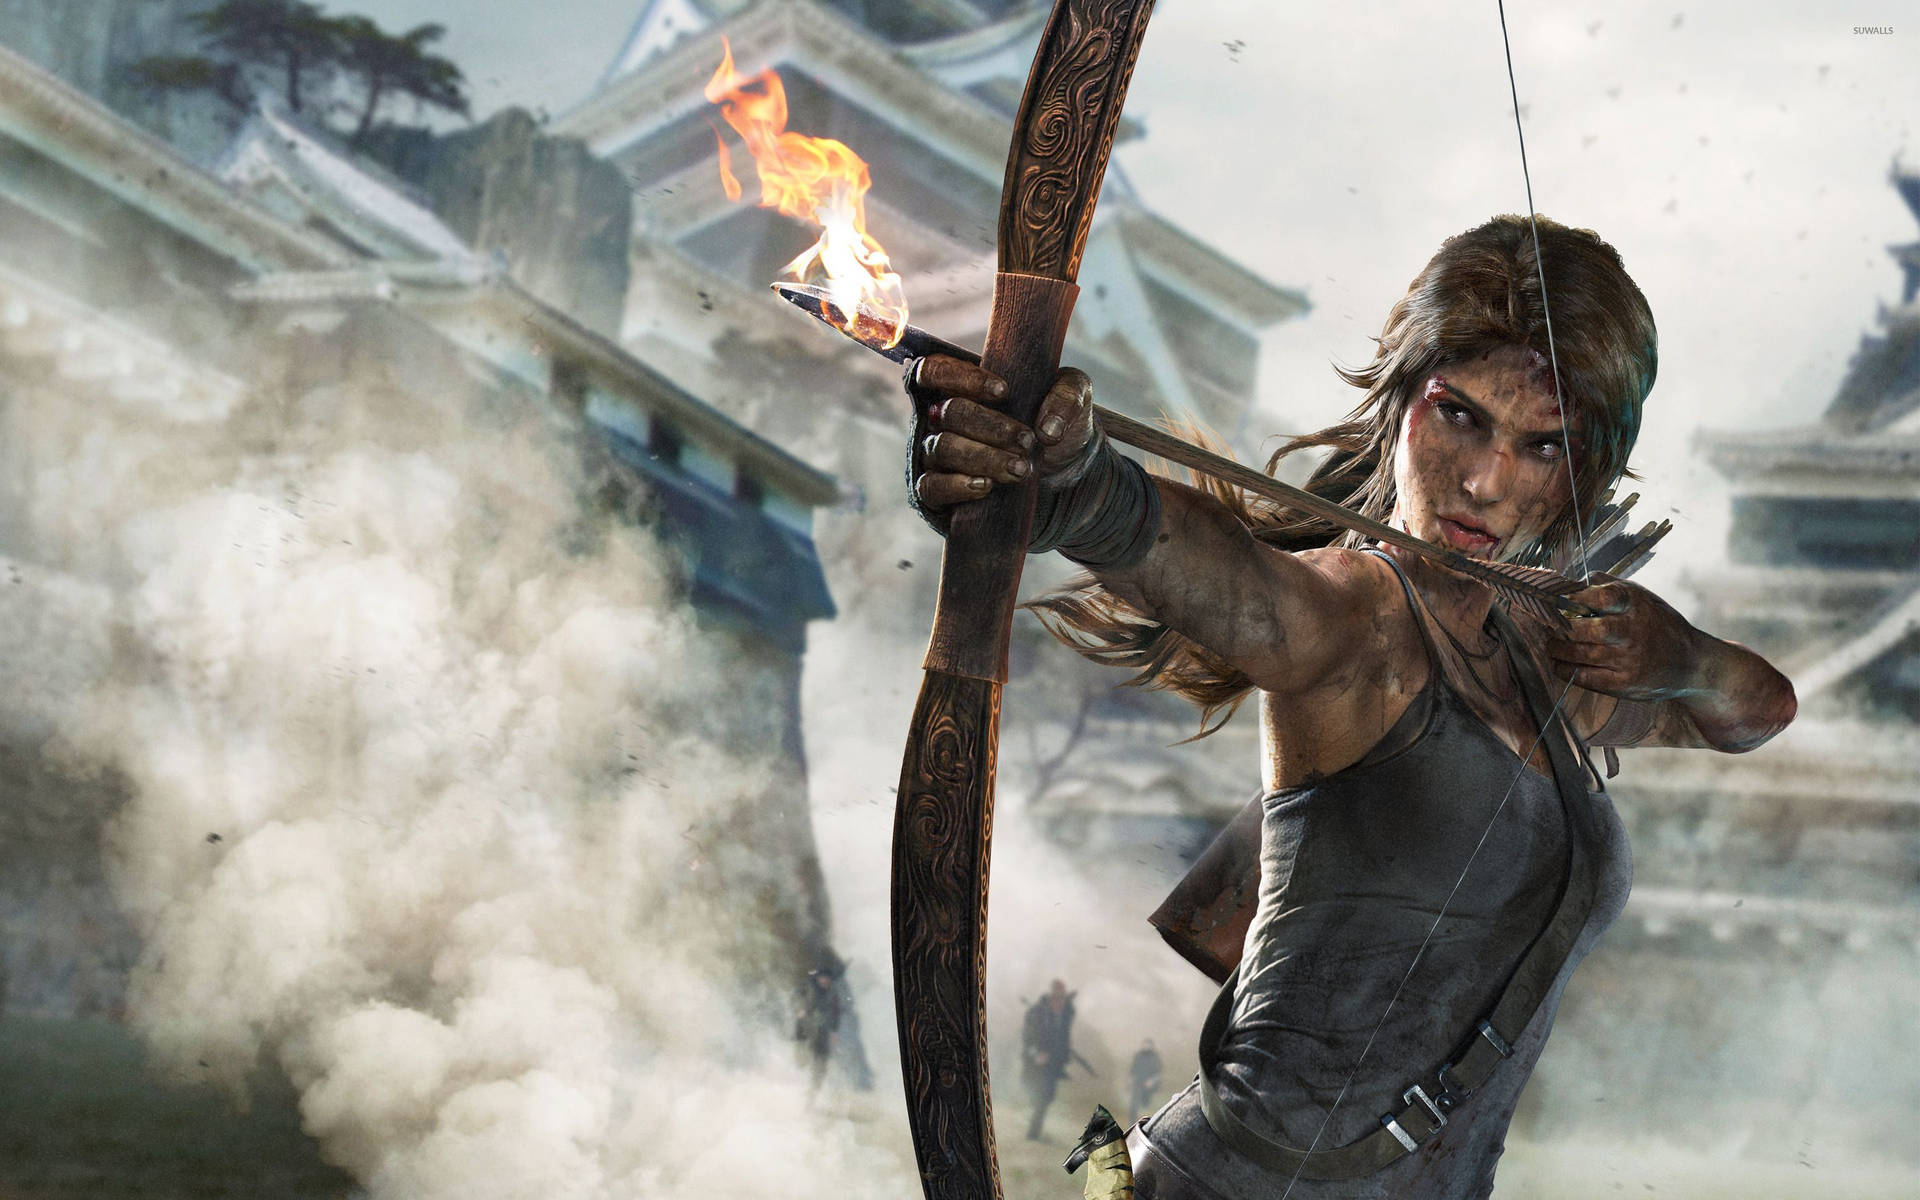 Laura Croft In Action As She Jumps From One Building Roof To Another In The Latest Tomb Raider Game. Wallpaper